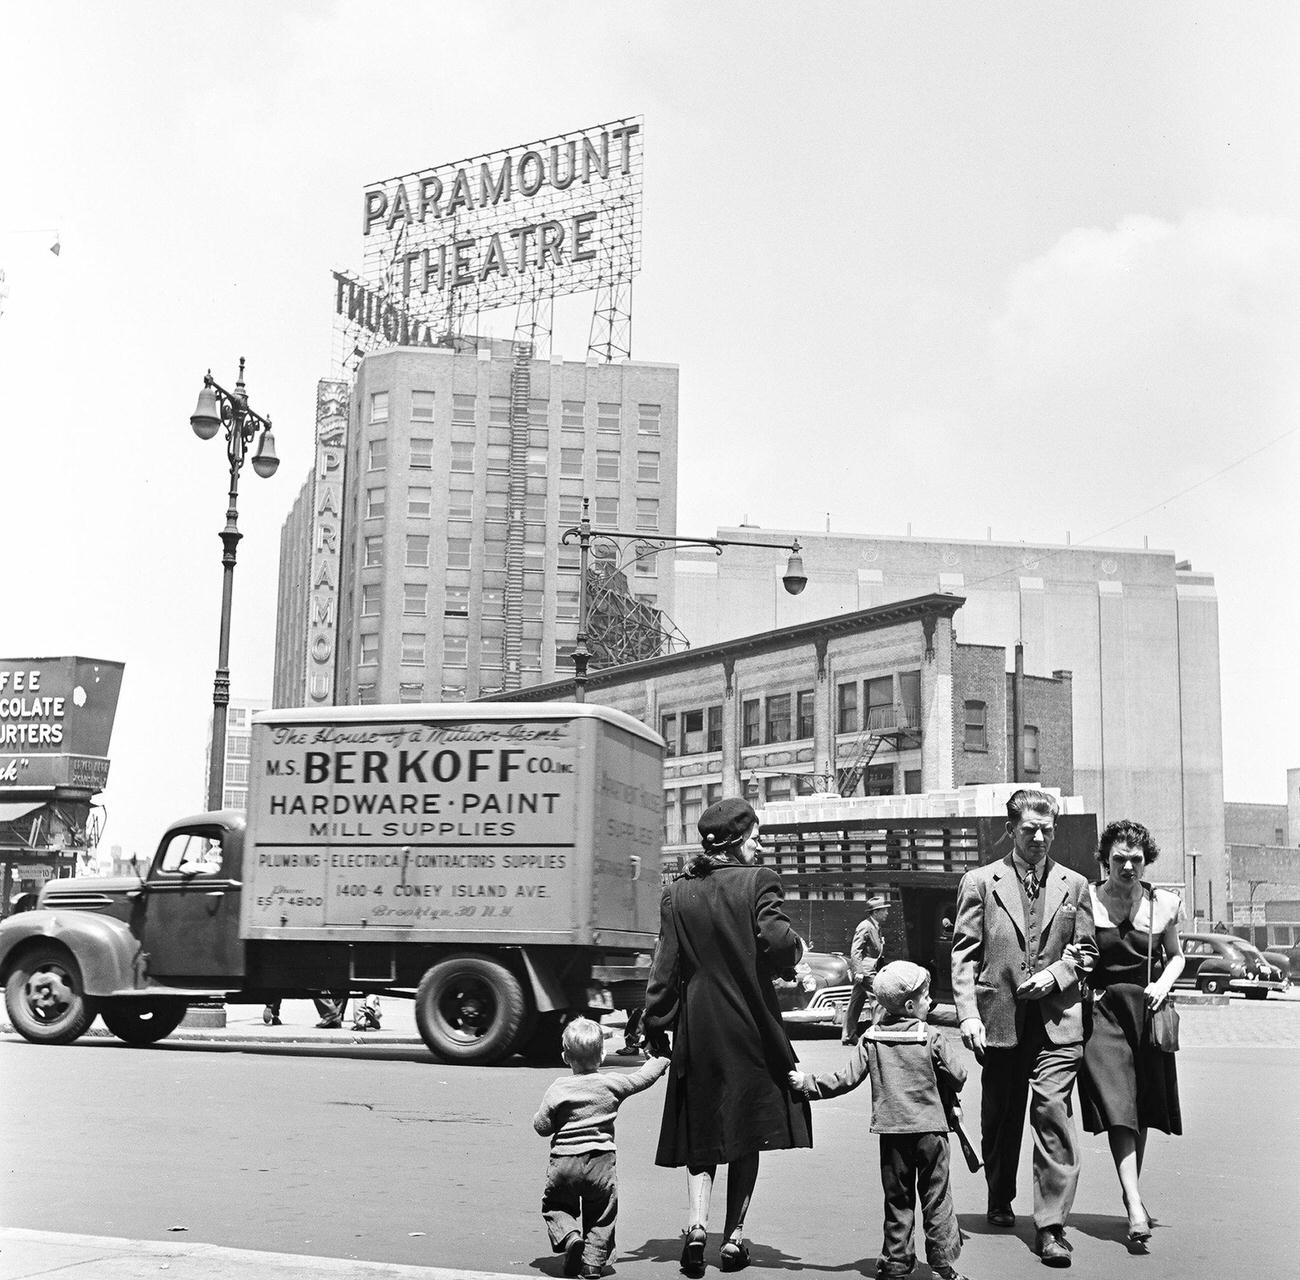 Looking North Across The Intersection Of Fulton Street And Flatbush Avenue, Towards The Paramount Theatre, Brooklyn, 1948